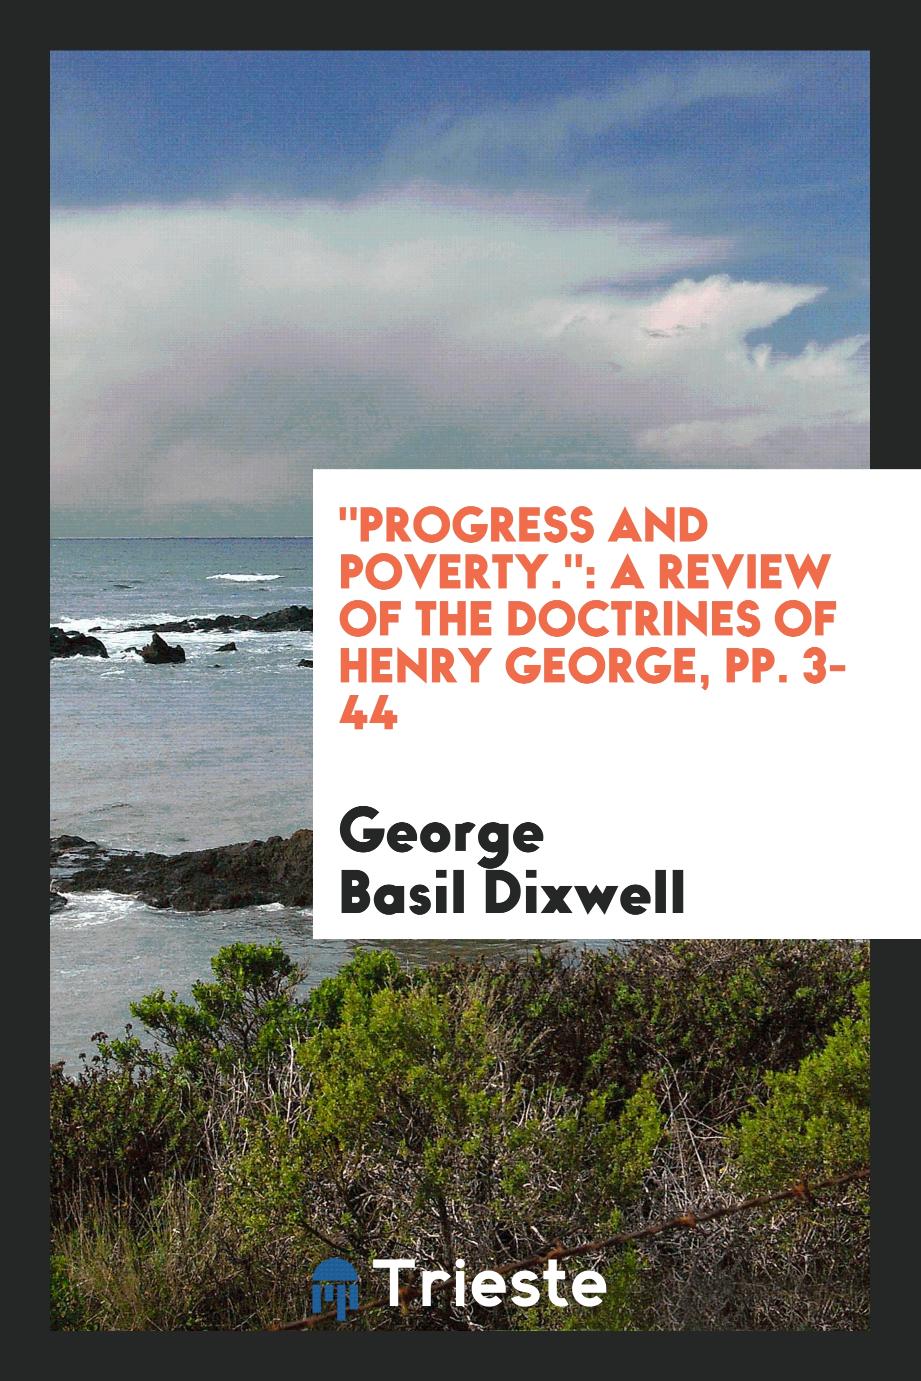 "Progress and Poverty.": A Review of the Doctrines of Henry George, pp. 3-44